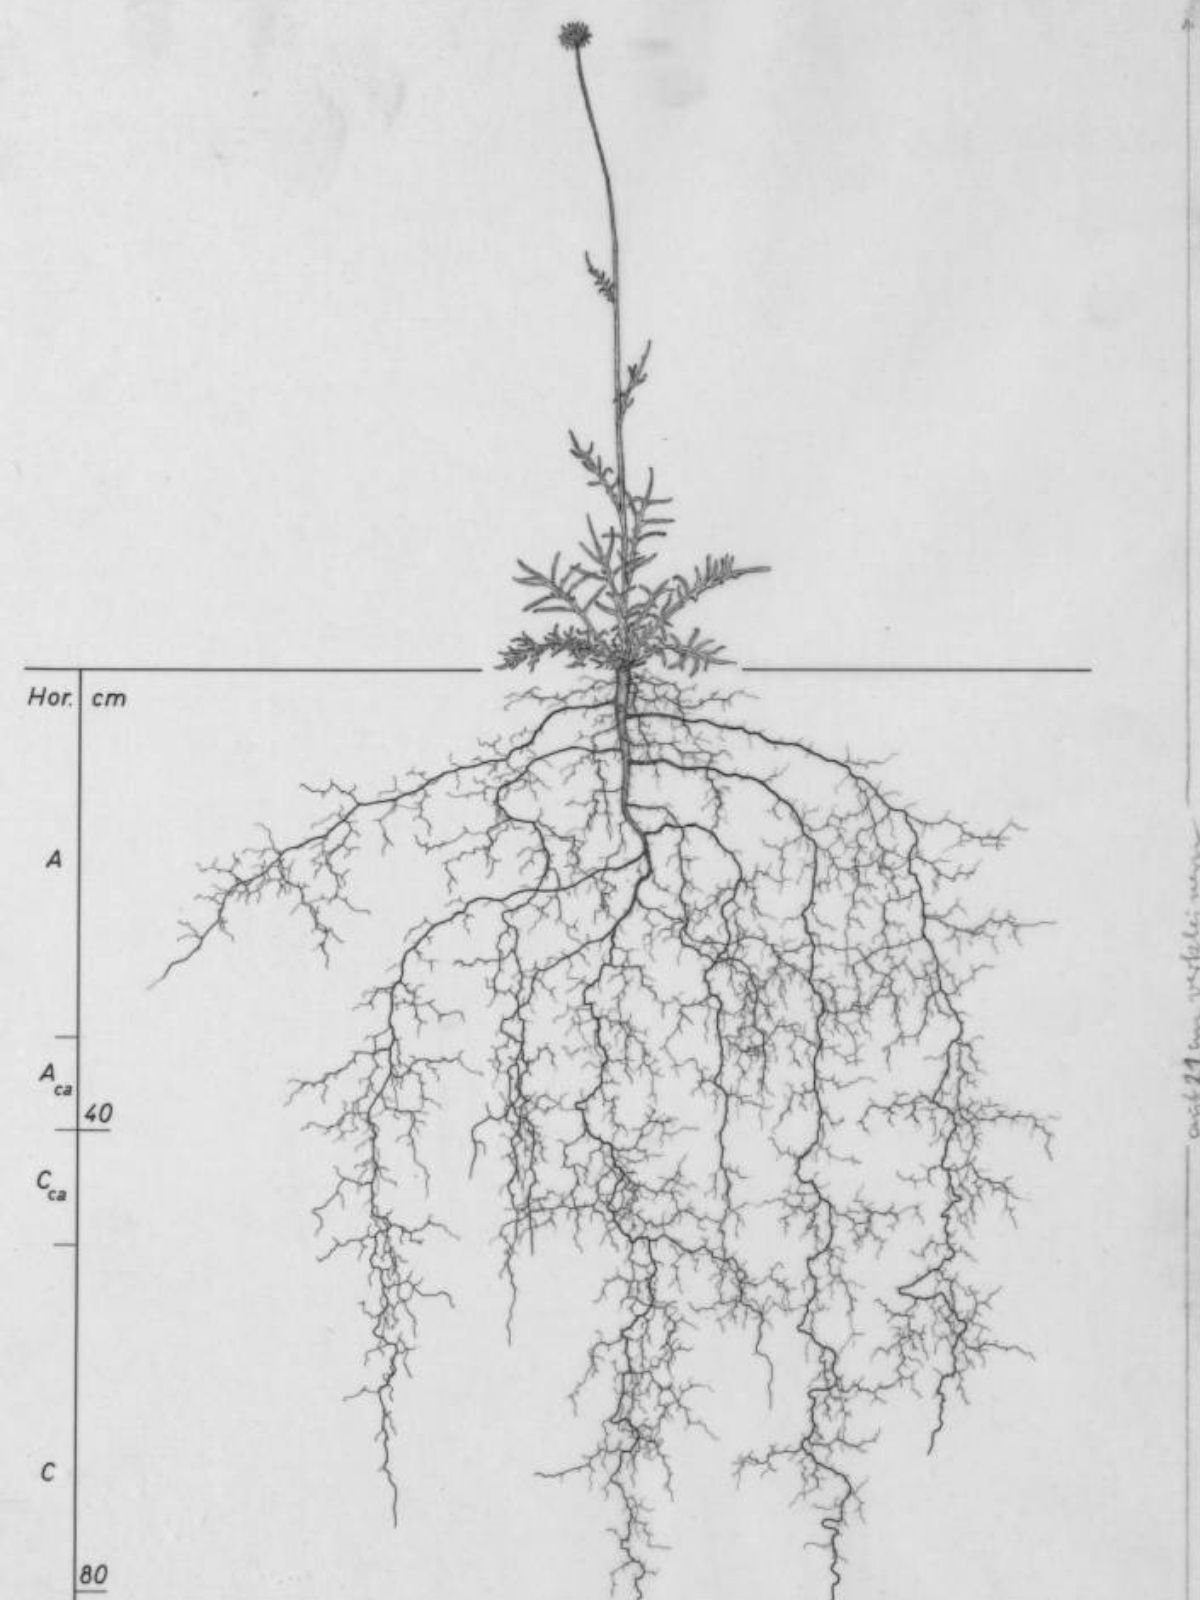 Wageningen University in the Netherlands completed research of complex root systems on Thursd